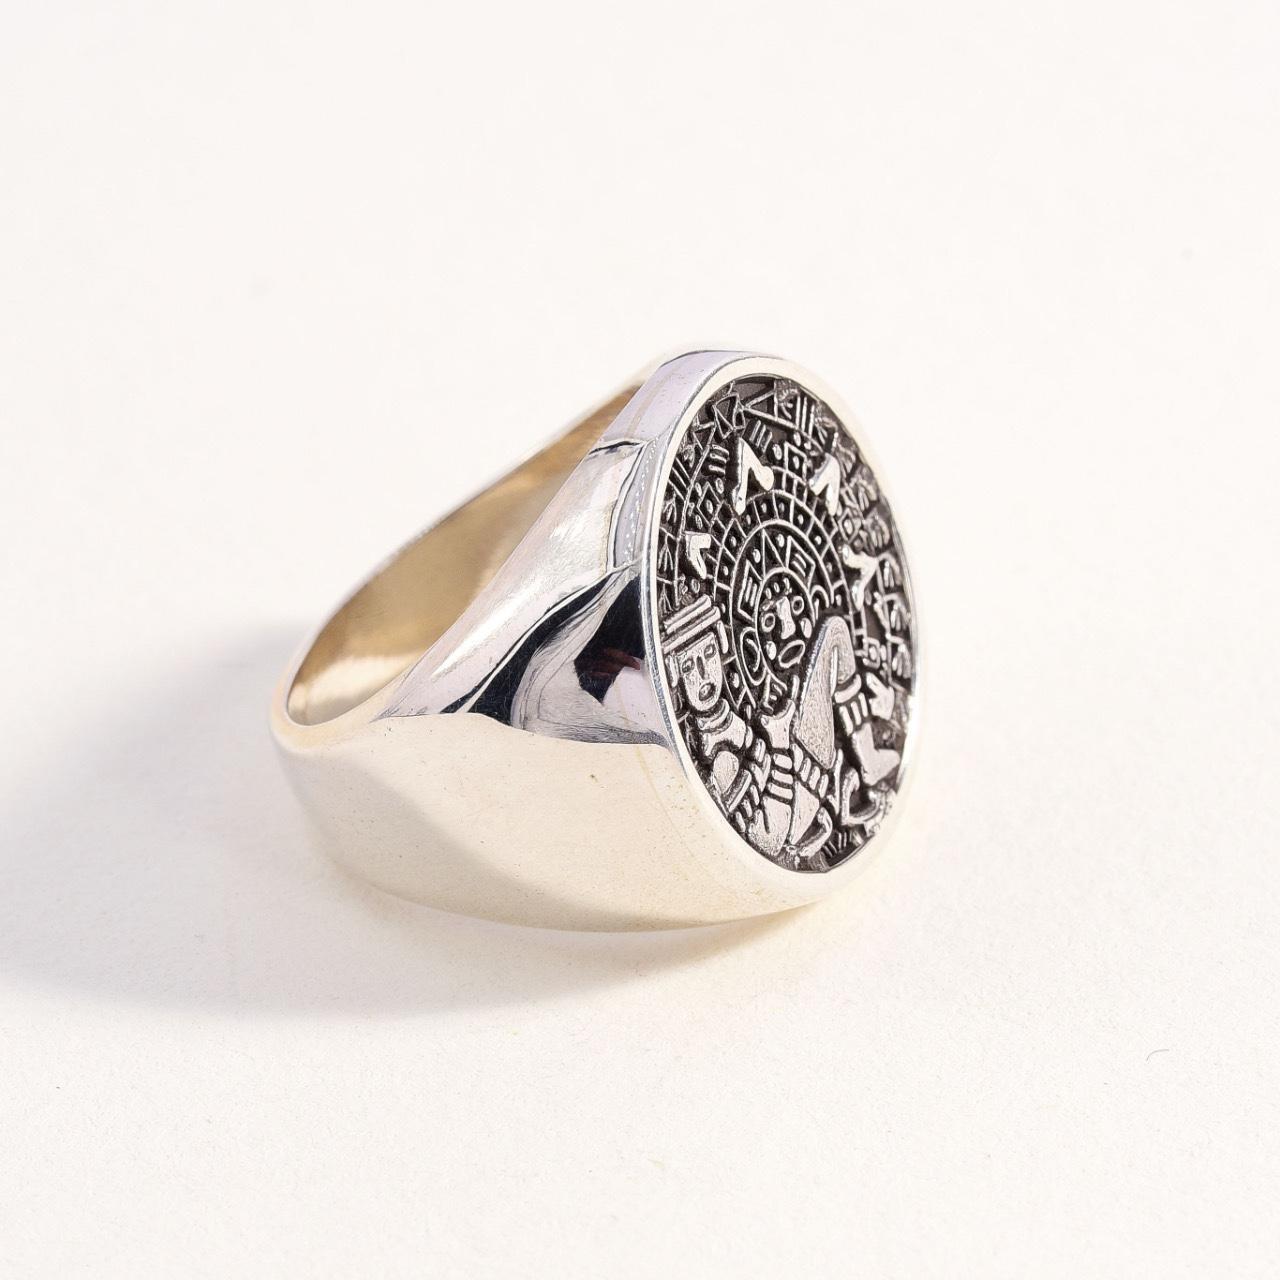 Product Image 3 - Sterling 925 Large Chacmool Ring

Sterling